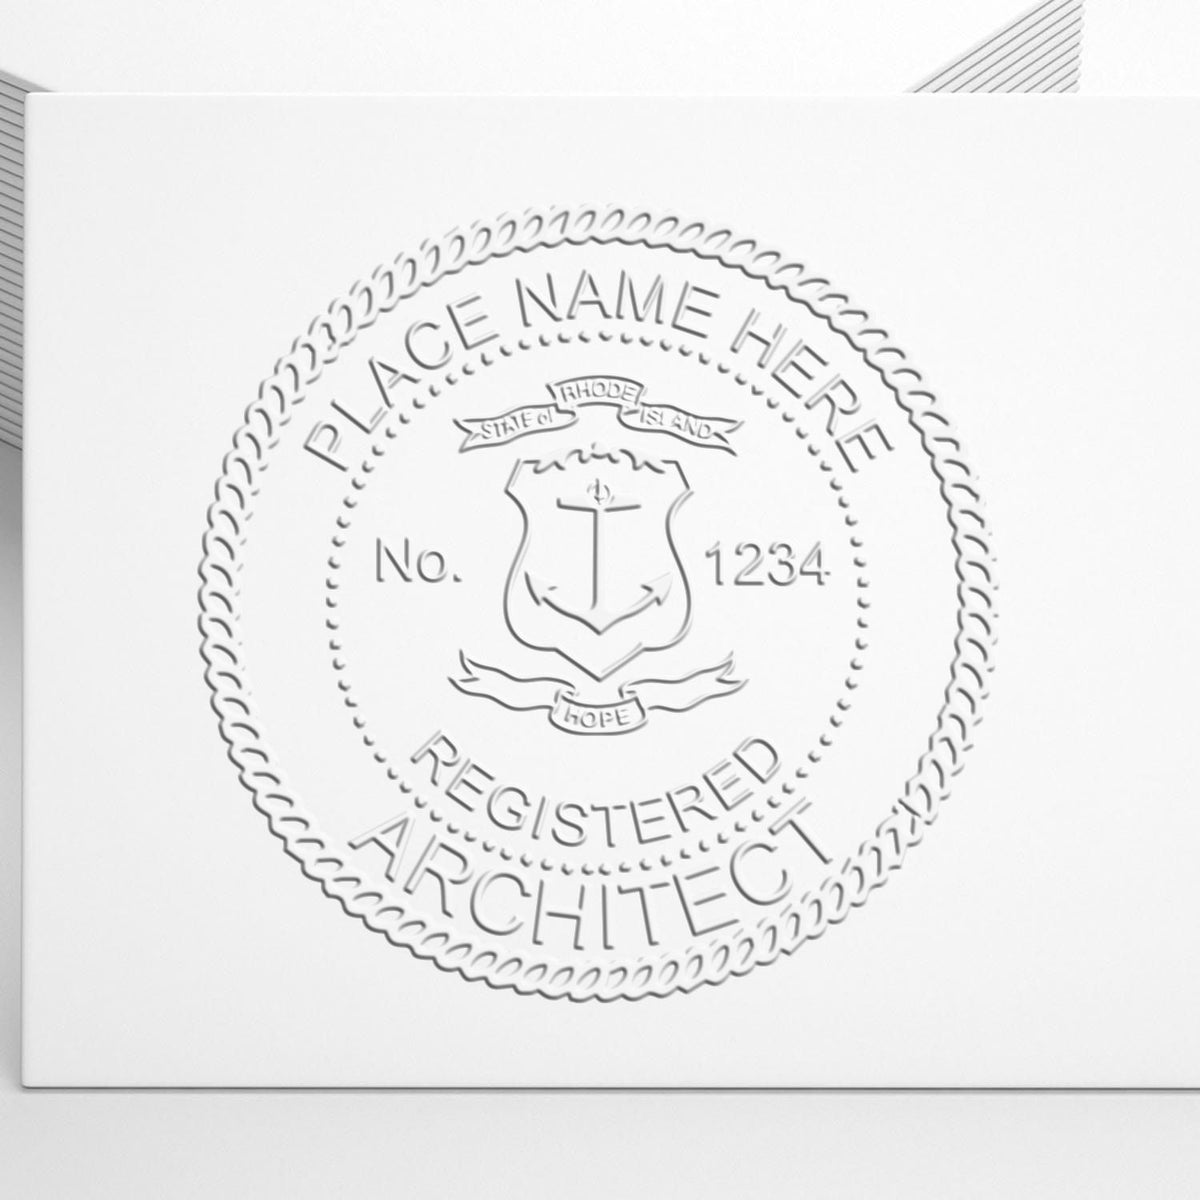 The State of Rhode Island Long Reach Architectural Embossing Seal stamp impression comes to life with a crisp, detailed photo on paper - showcasing true professional quality.